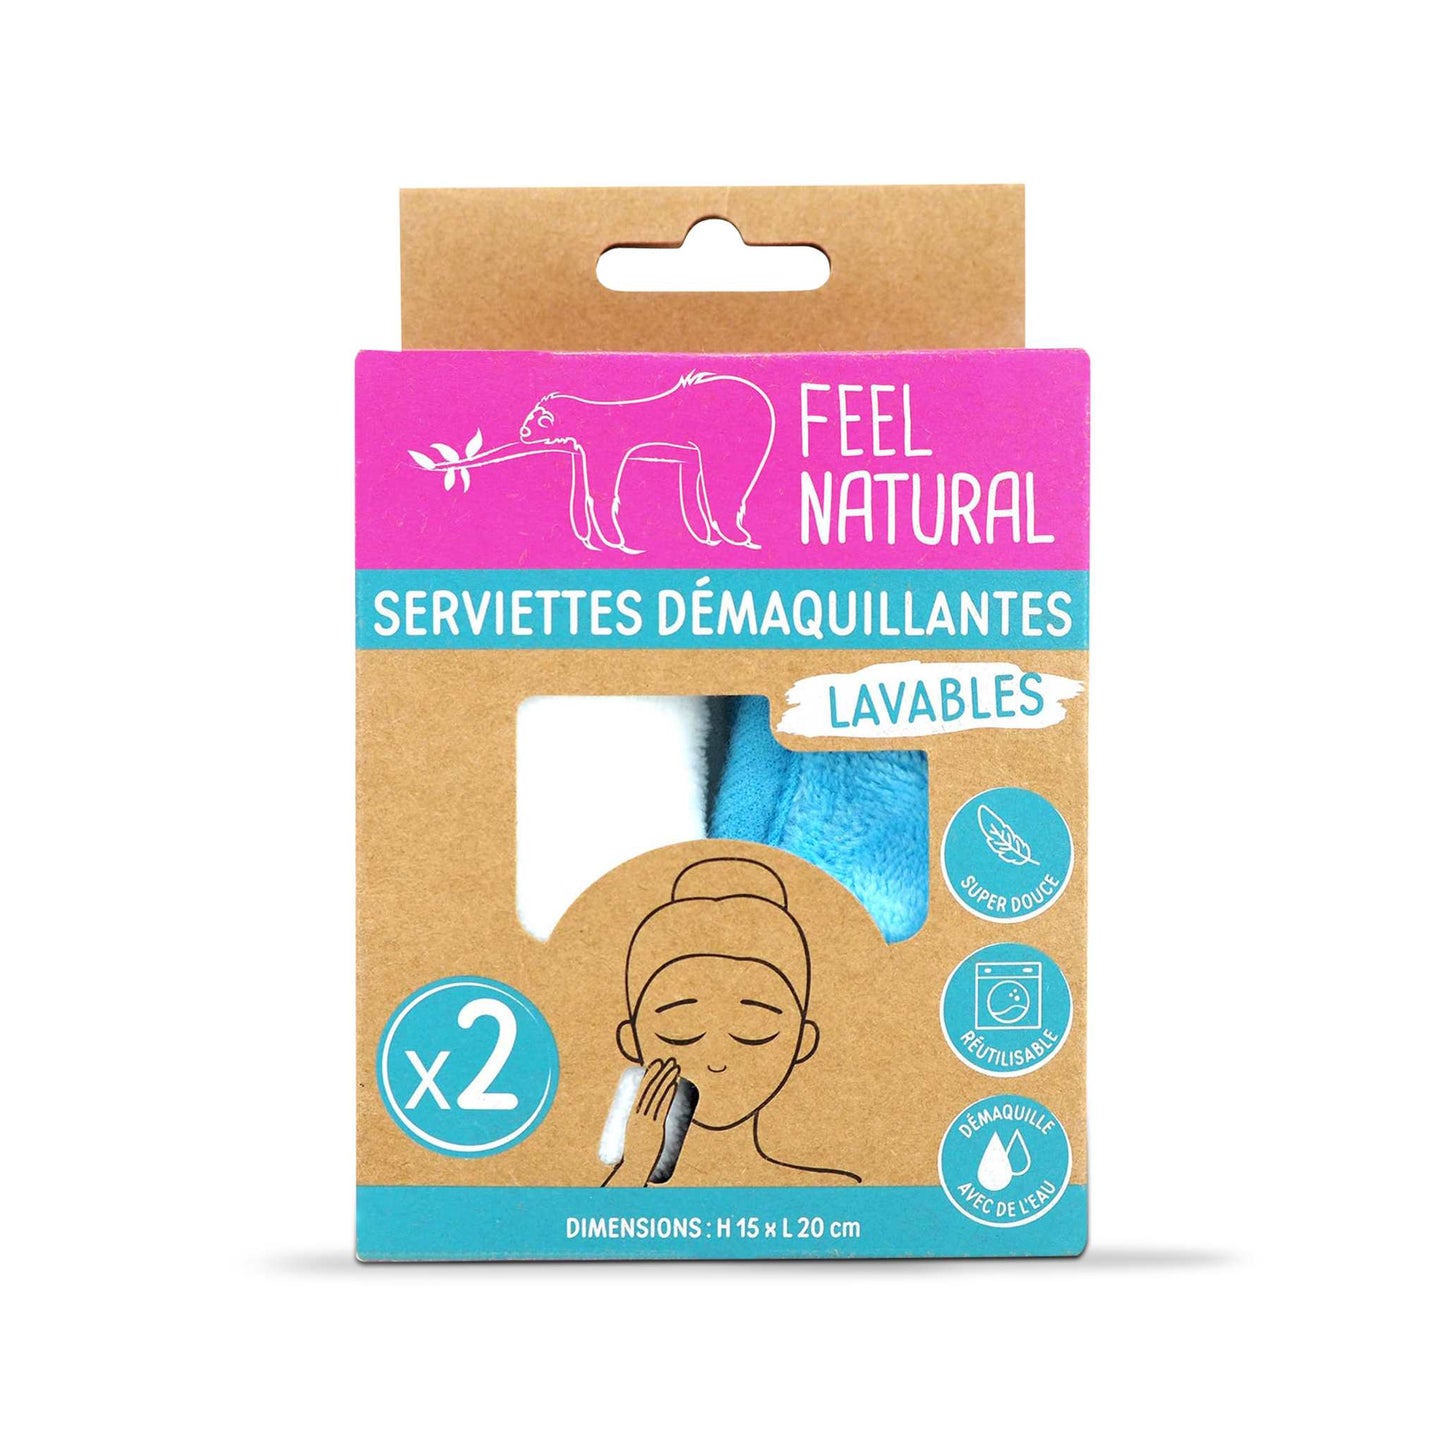 Feel Natural Makeup Removers Set of 2 Washable Microfiber Makeup Remover Pads - Feel Natural